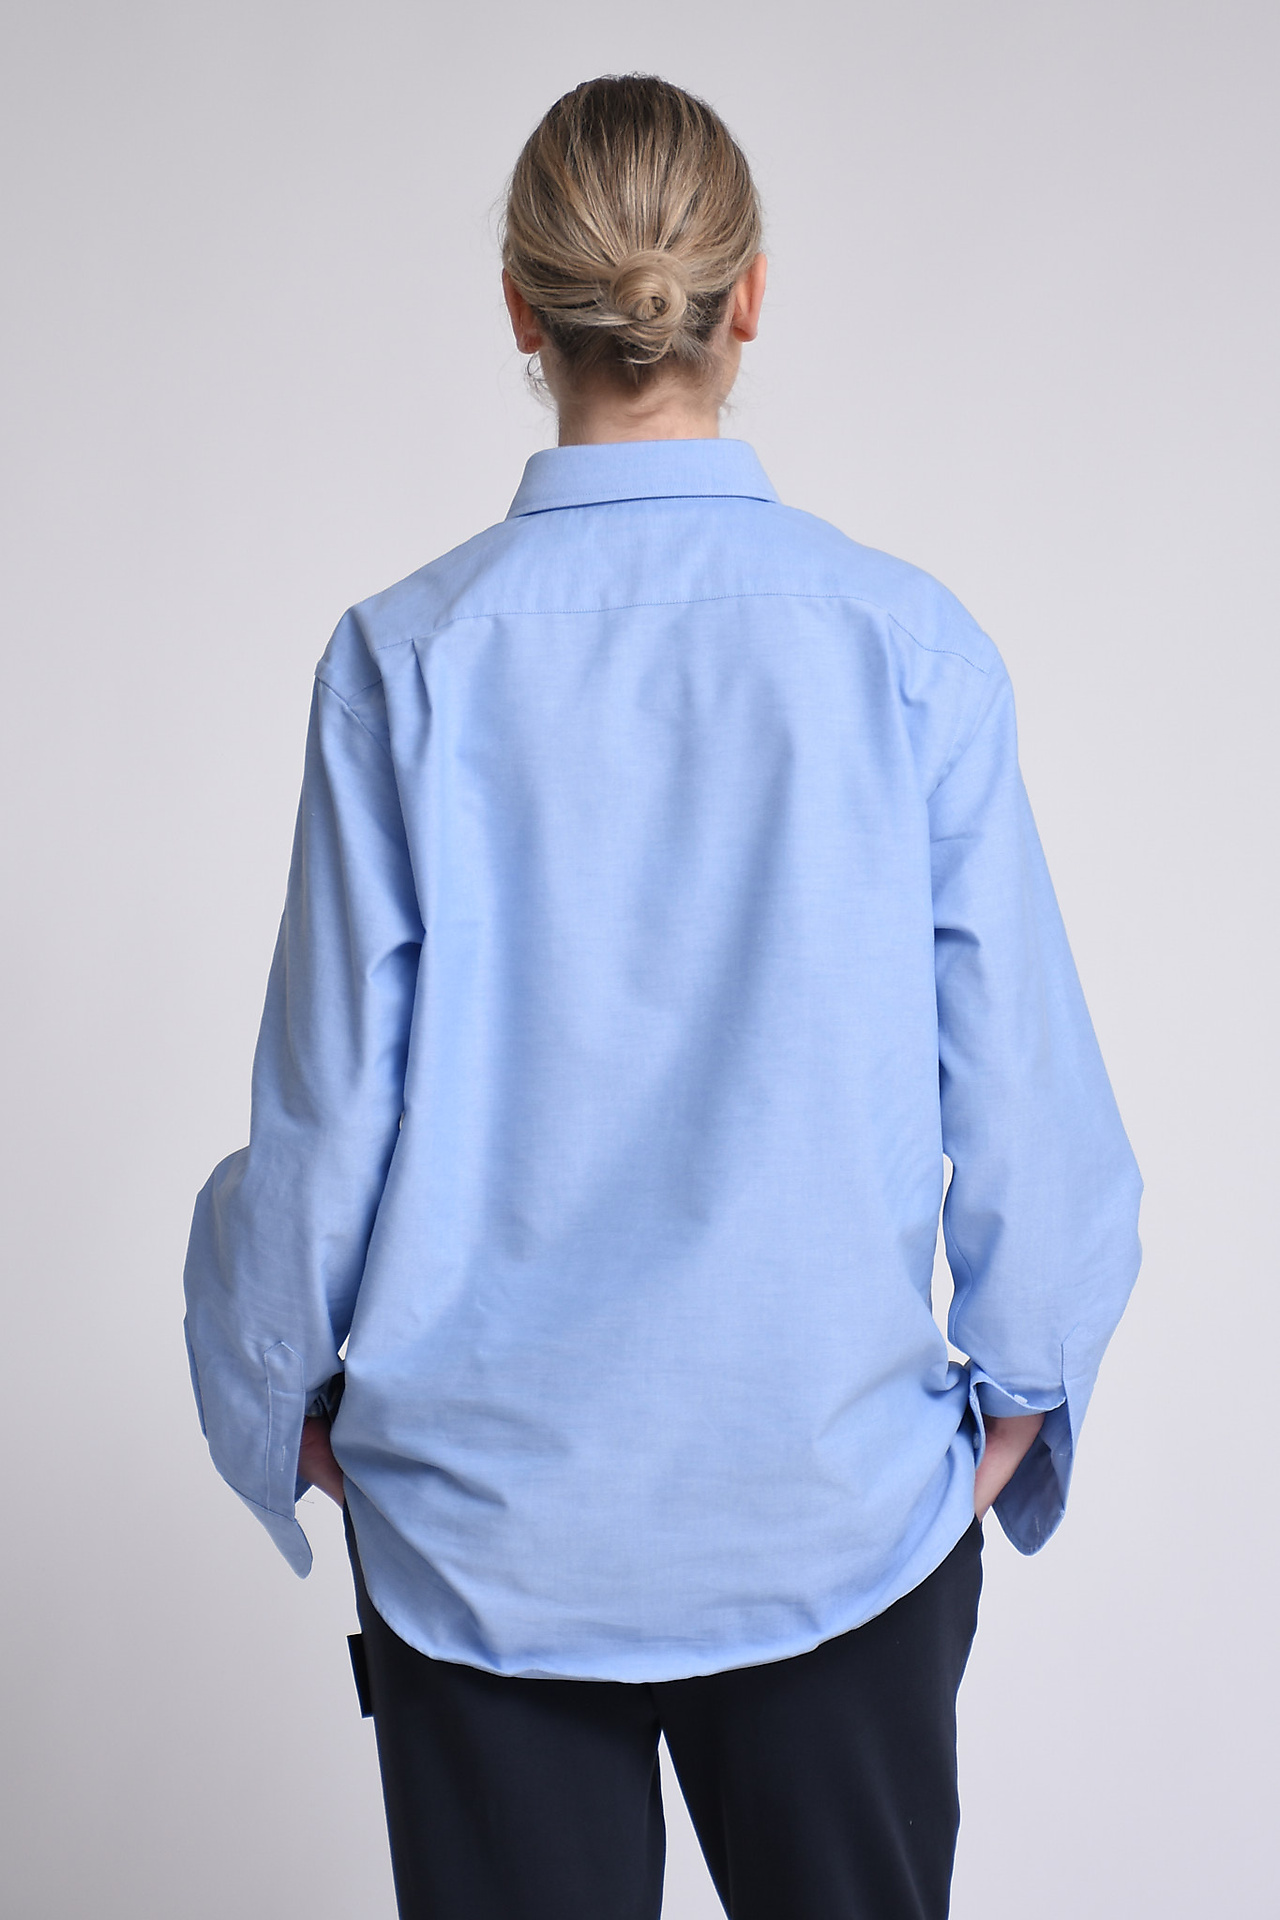 Made in Tomboy Tops Blue